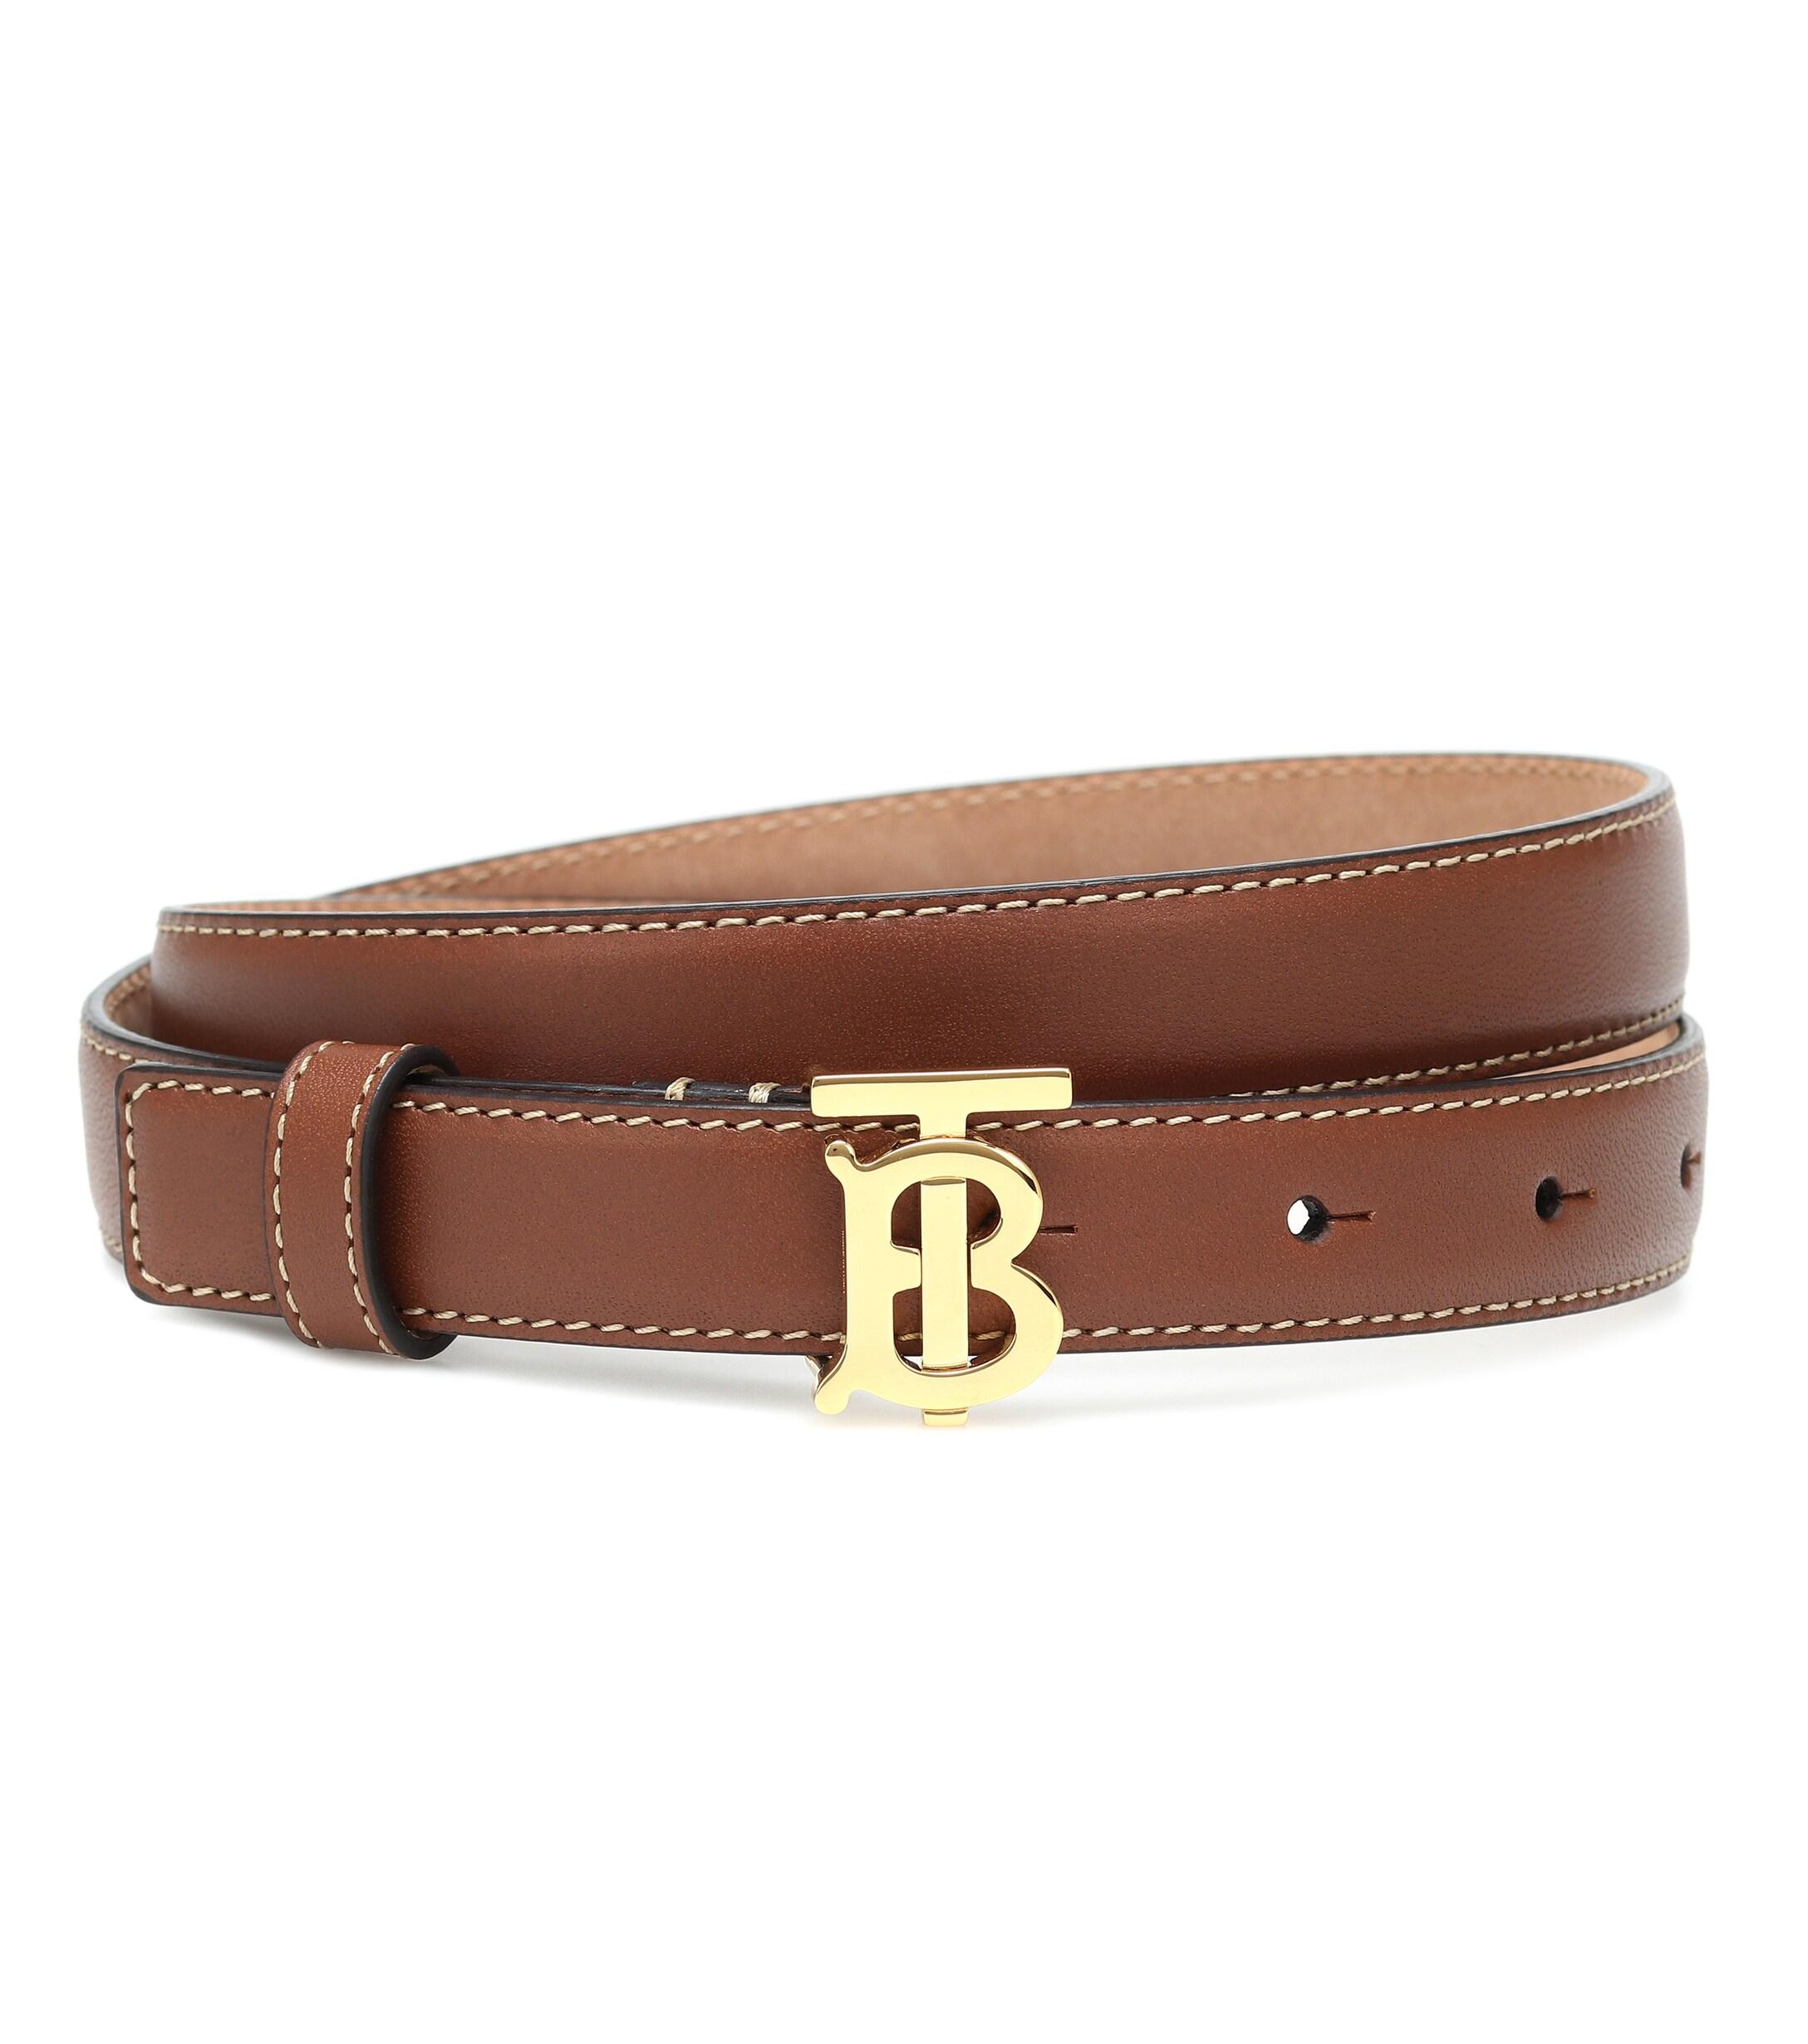 Burberry Tb Leather Belt in Brown - Lyst